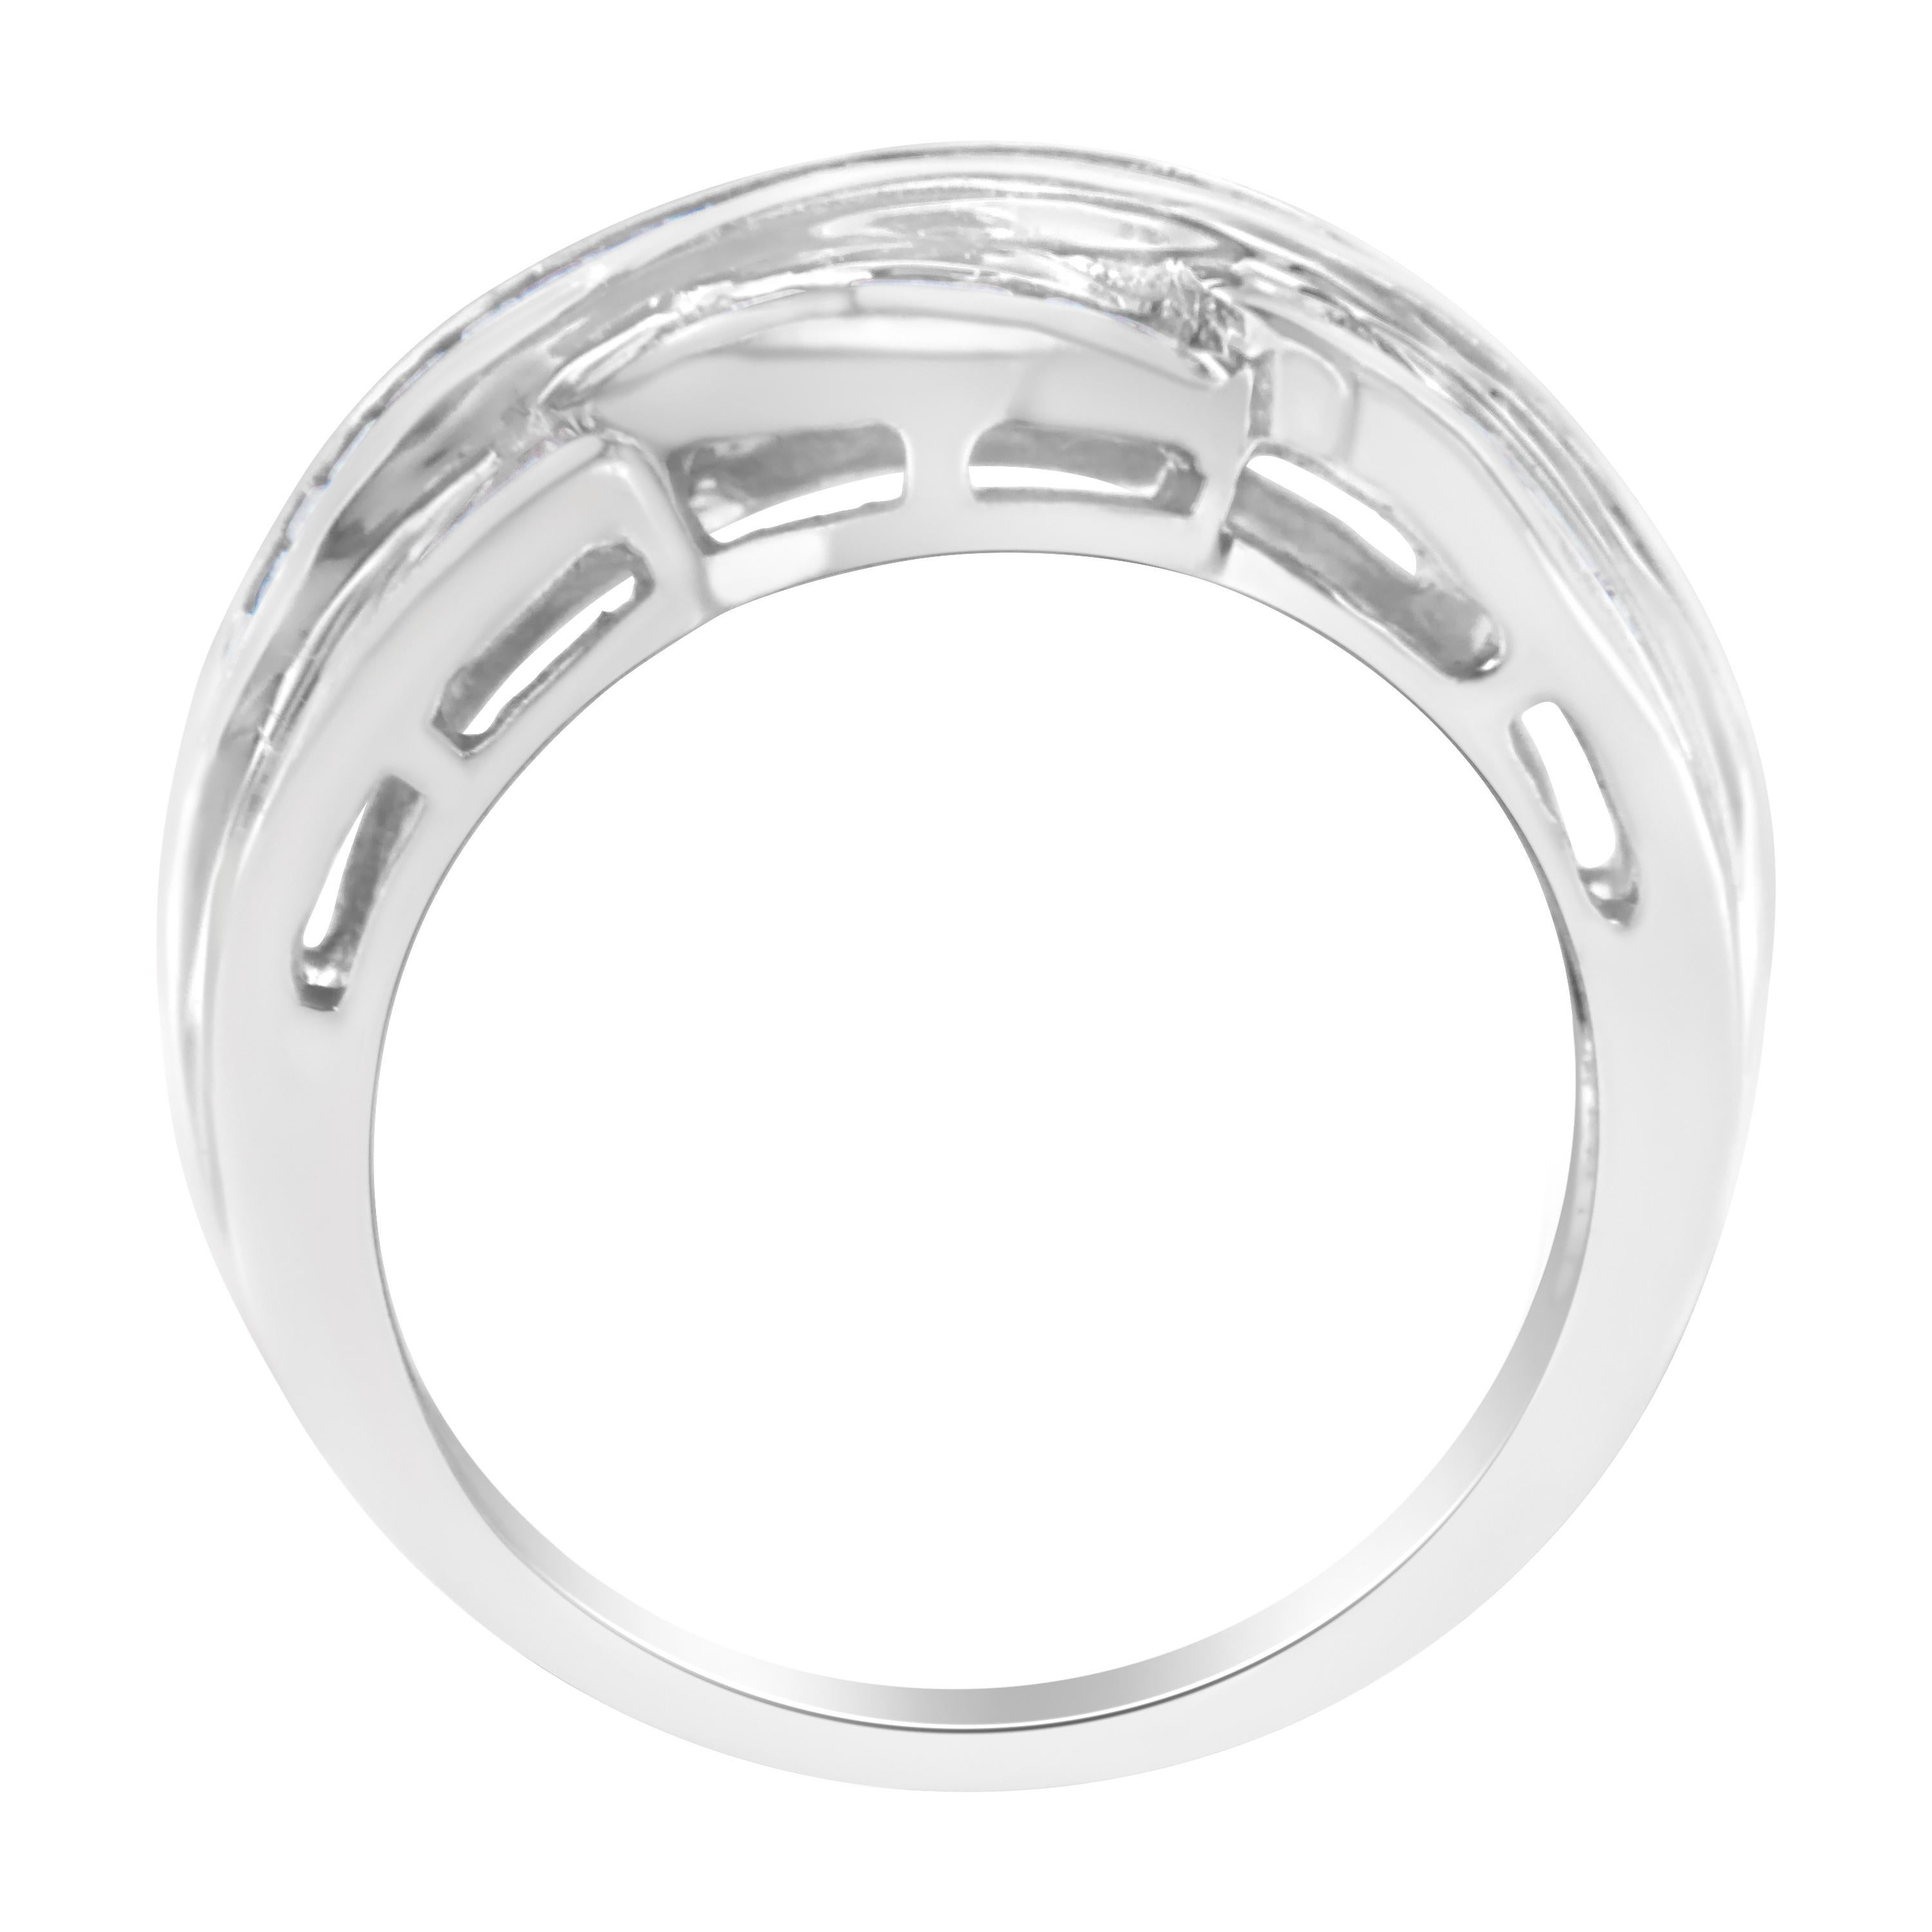 Contemporary 14K White Gold 1 1/2 Carat Diamond Cocktail Band Ring